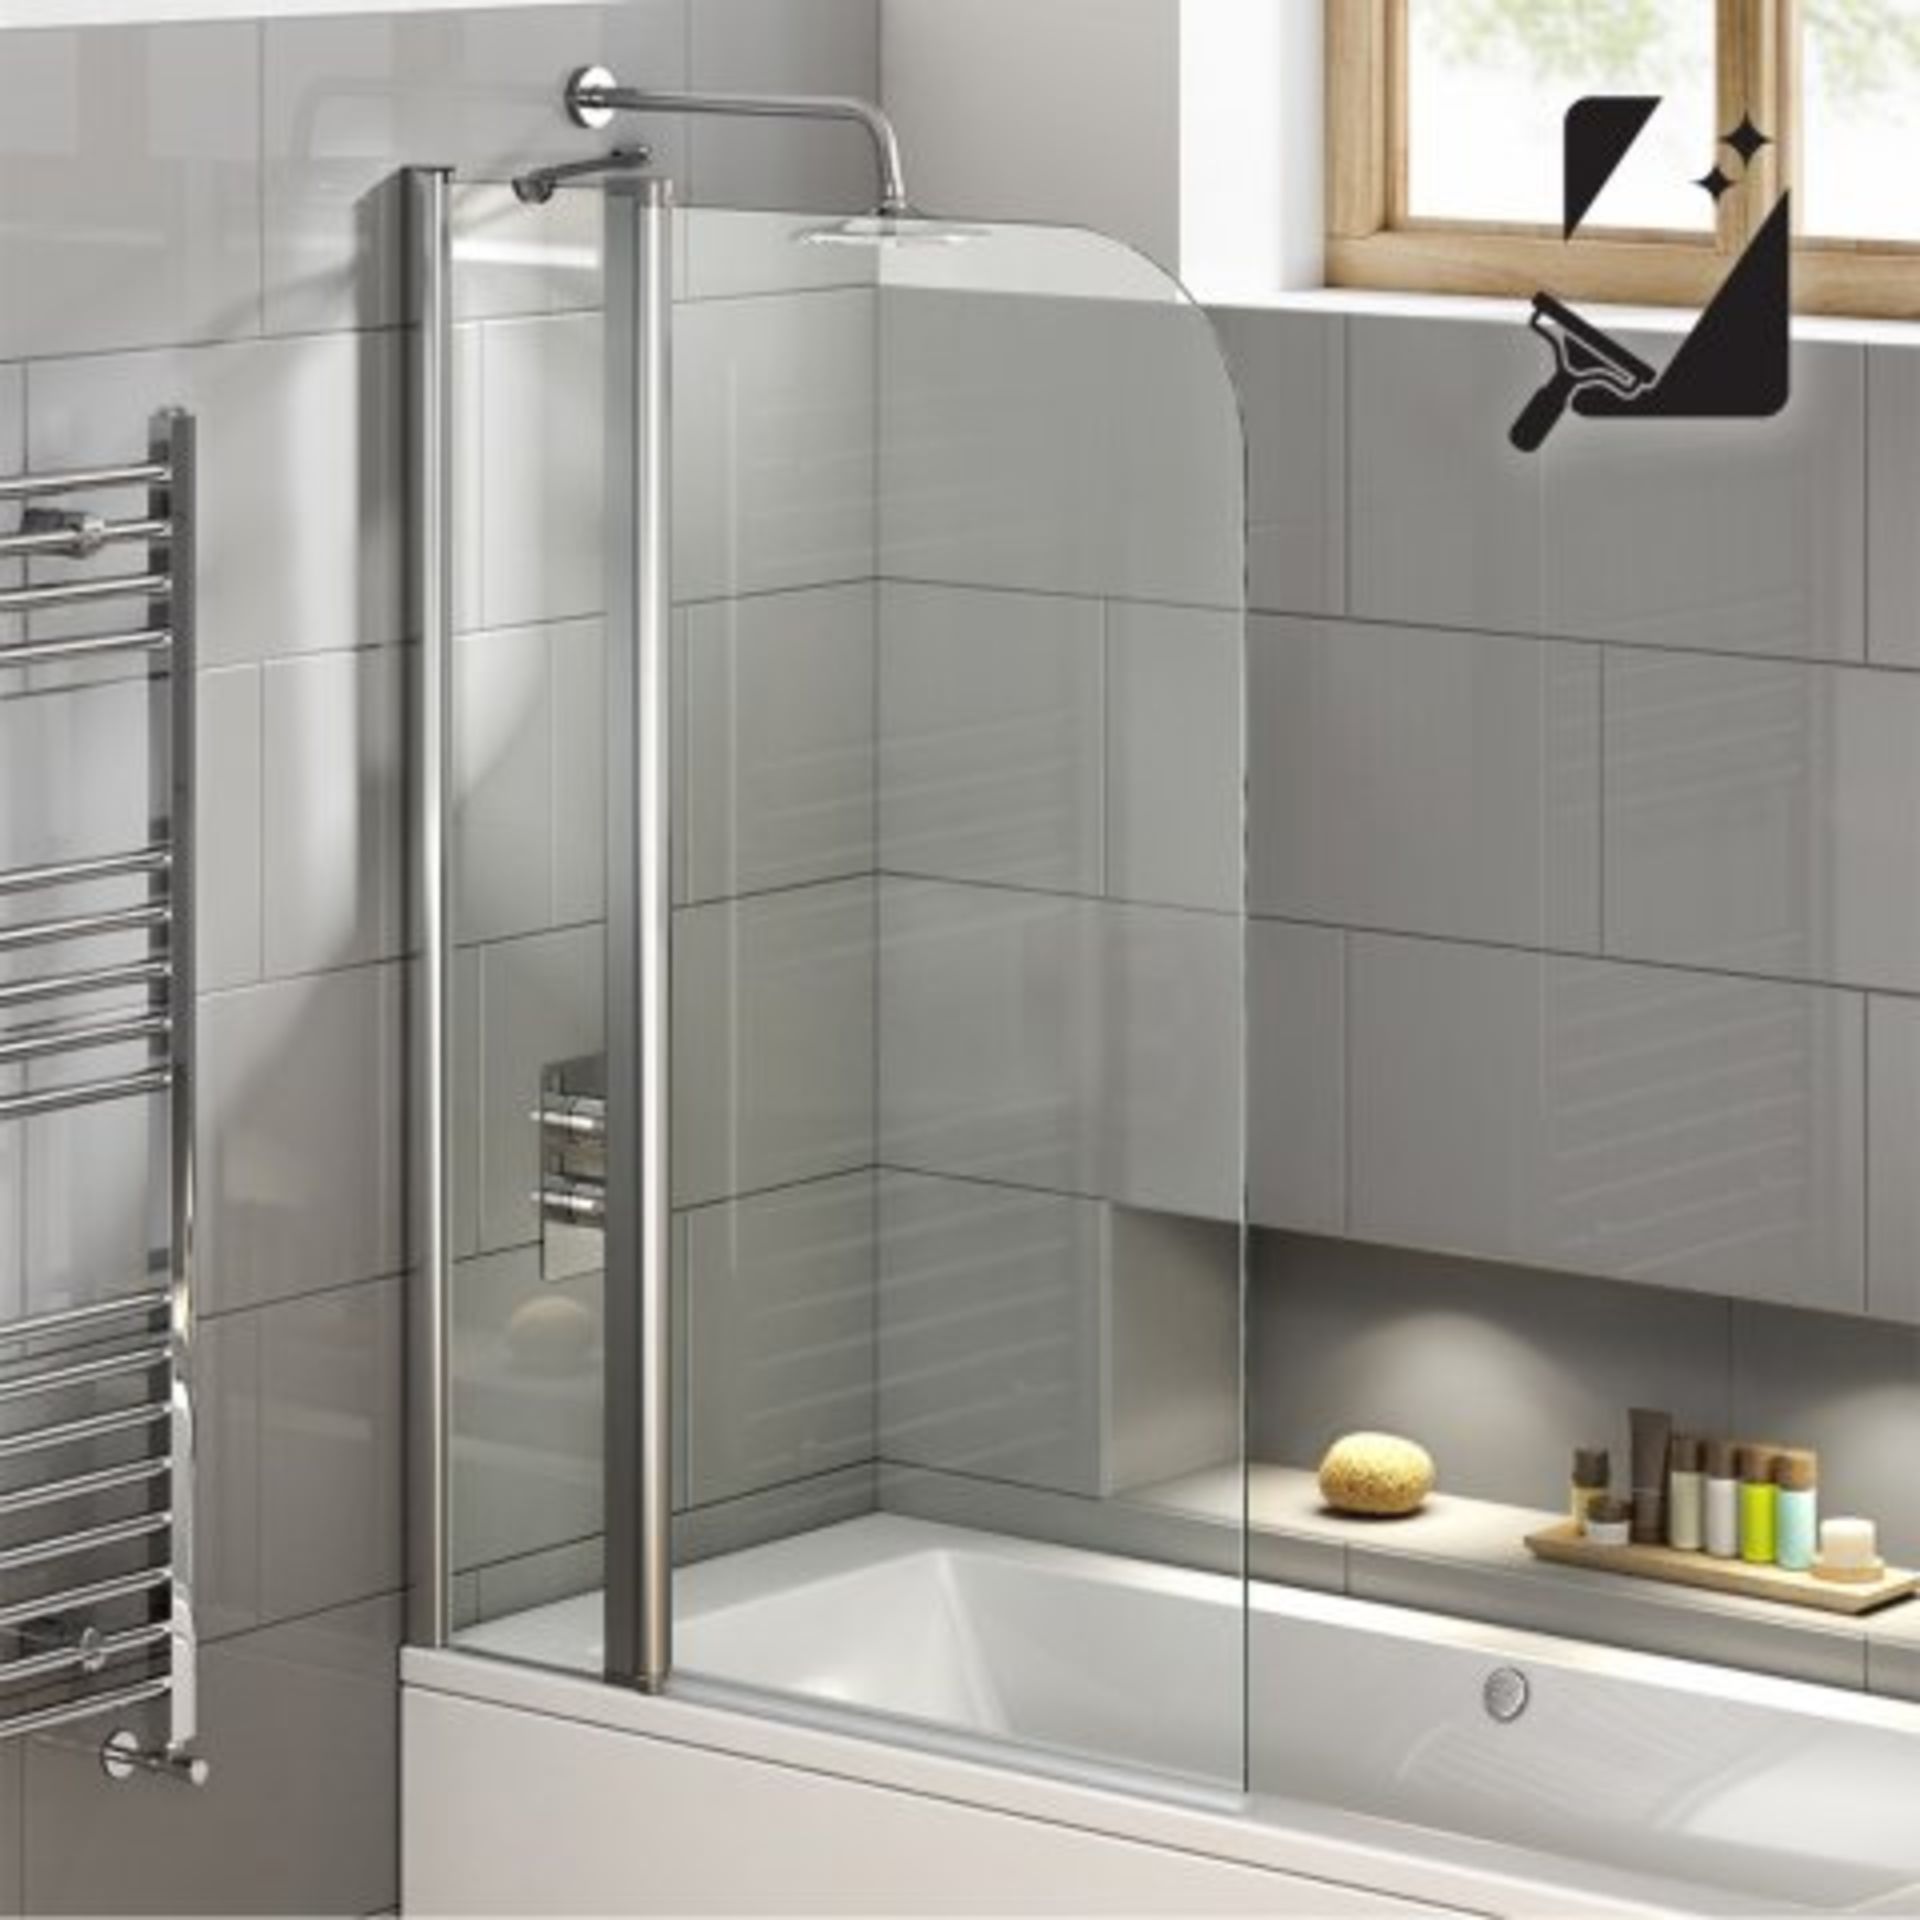 (L93) 1000mm - 6mm - EasyClean Straight Bath Screen RRP £224.99 The clue is in the name: Easy Clean! - Image 3 of 6